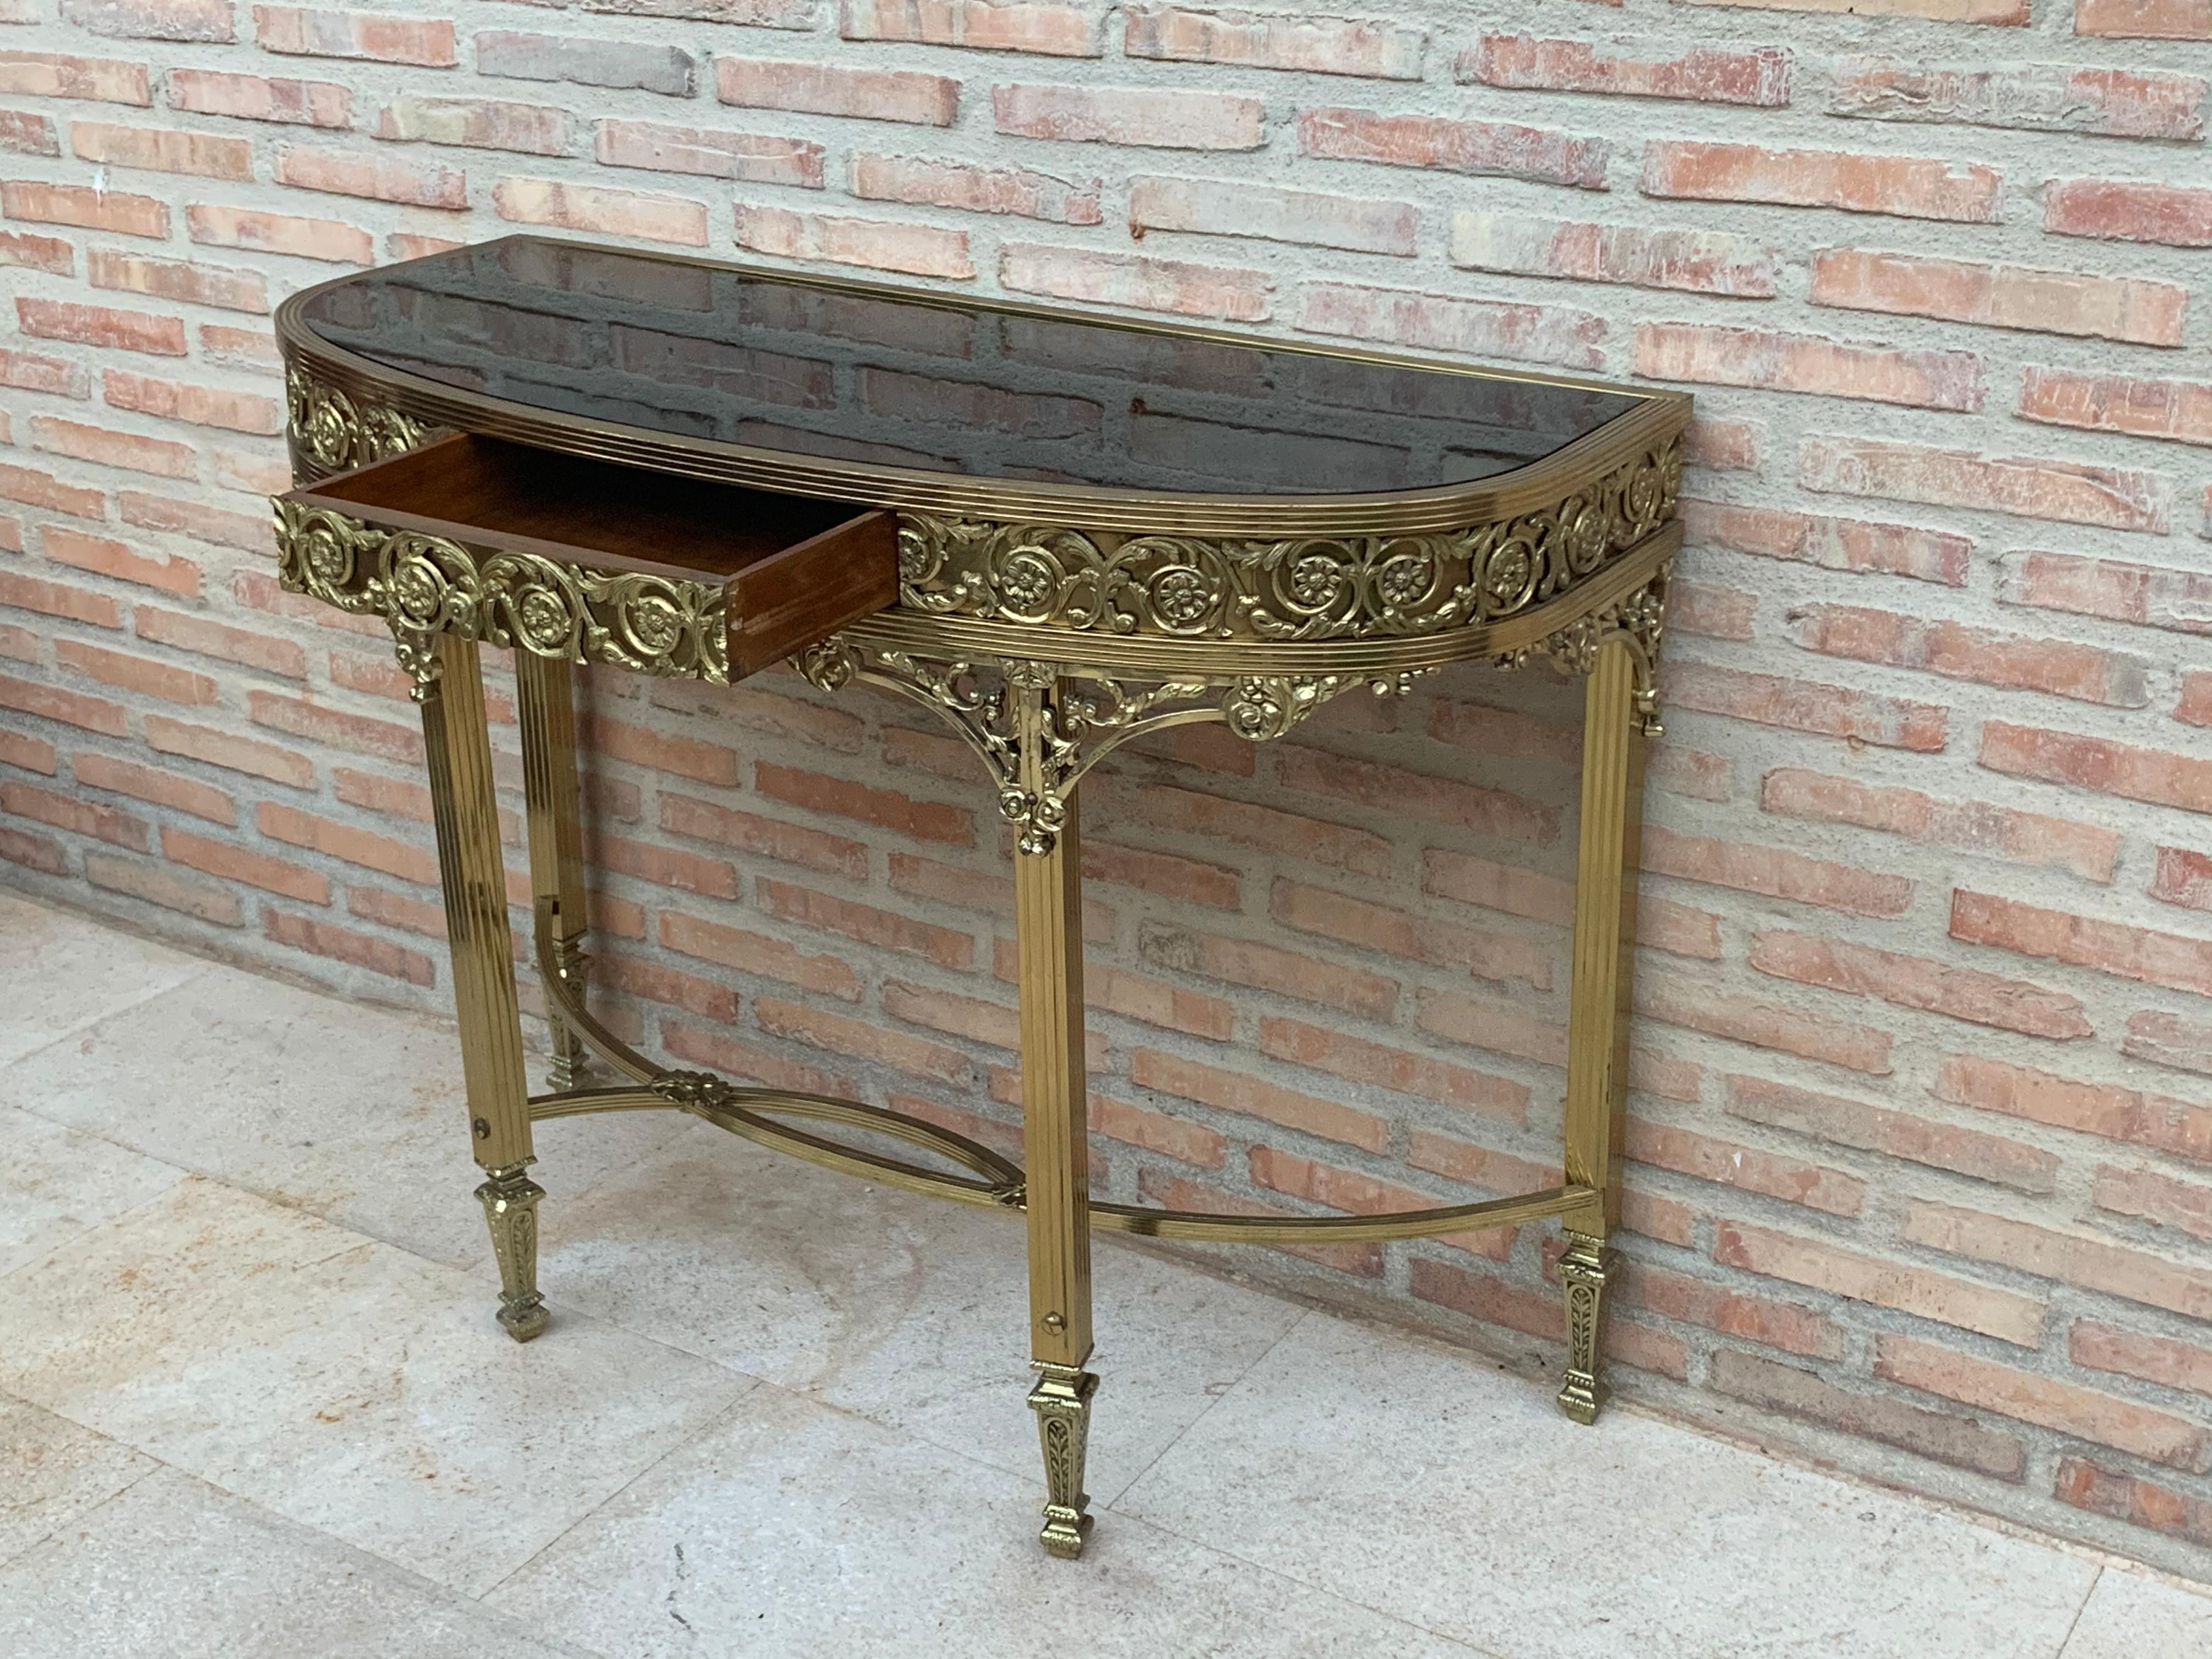 20th Century French Bronze Kidney Mirrored Dressing Table or Vanity with One-Drawer